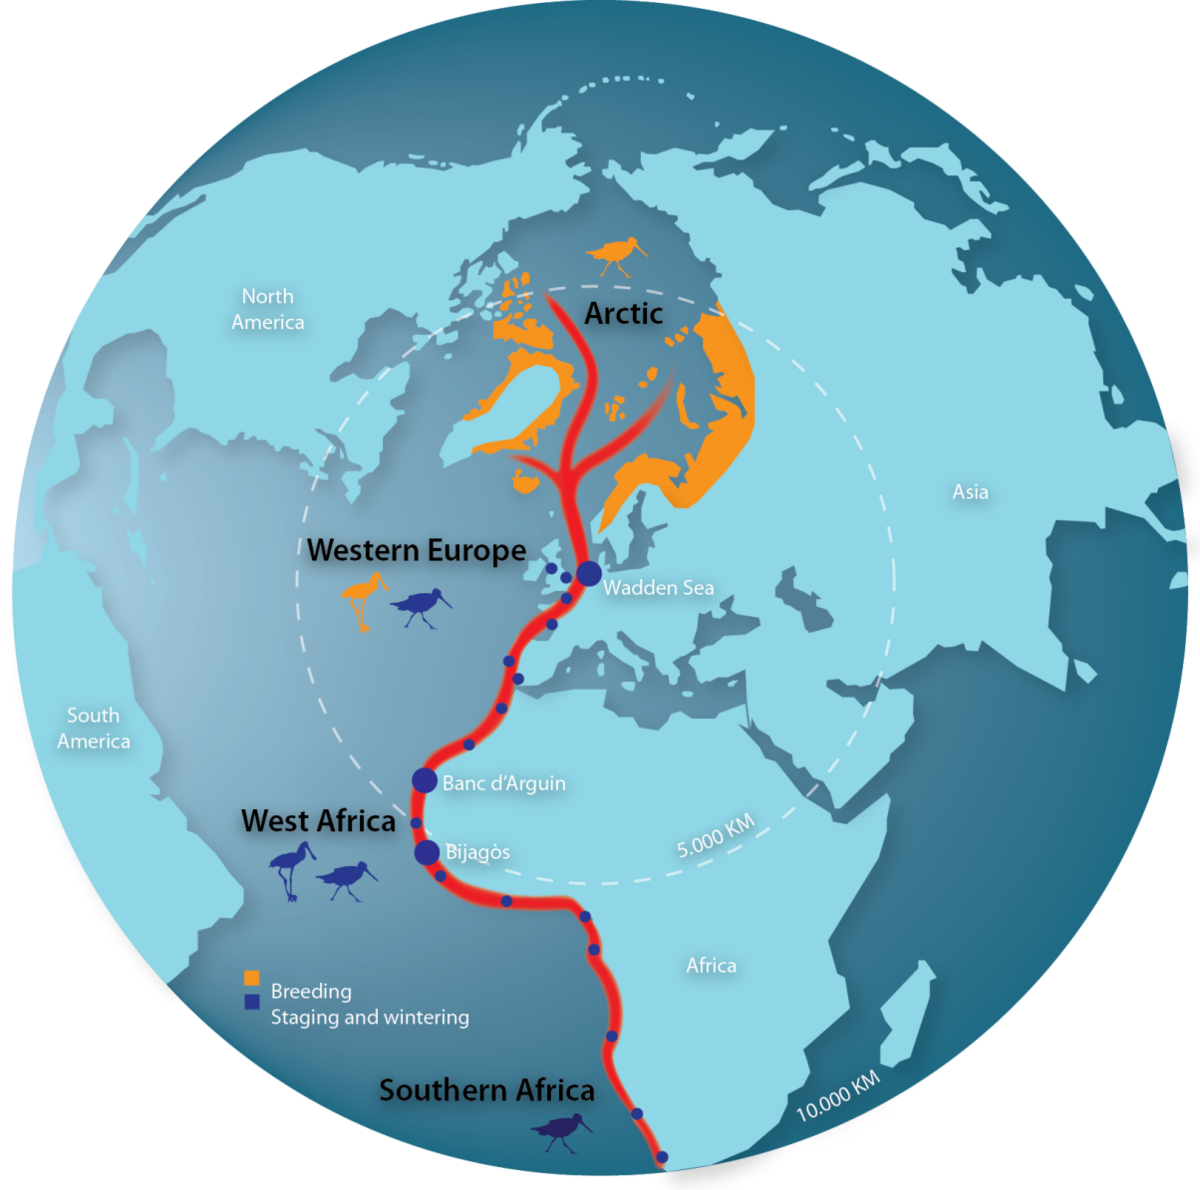 Figure 1. The East Atlantic Flyway. Breeding birds from the Arctic (in orange) between Siberia and Northeast Canada use sites (blue dots) along the Eastern shore of the Atlantic Ocean and connected seas during migration and wintering. At these sites they mix up with breeding populations both from Western Europe and Western Africa which also migrate and winter at these sites (Image CWSS).